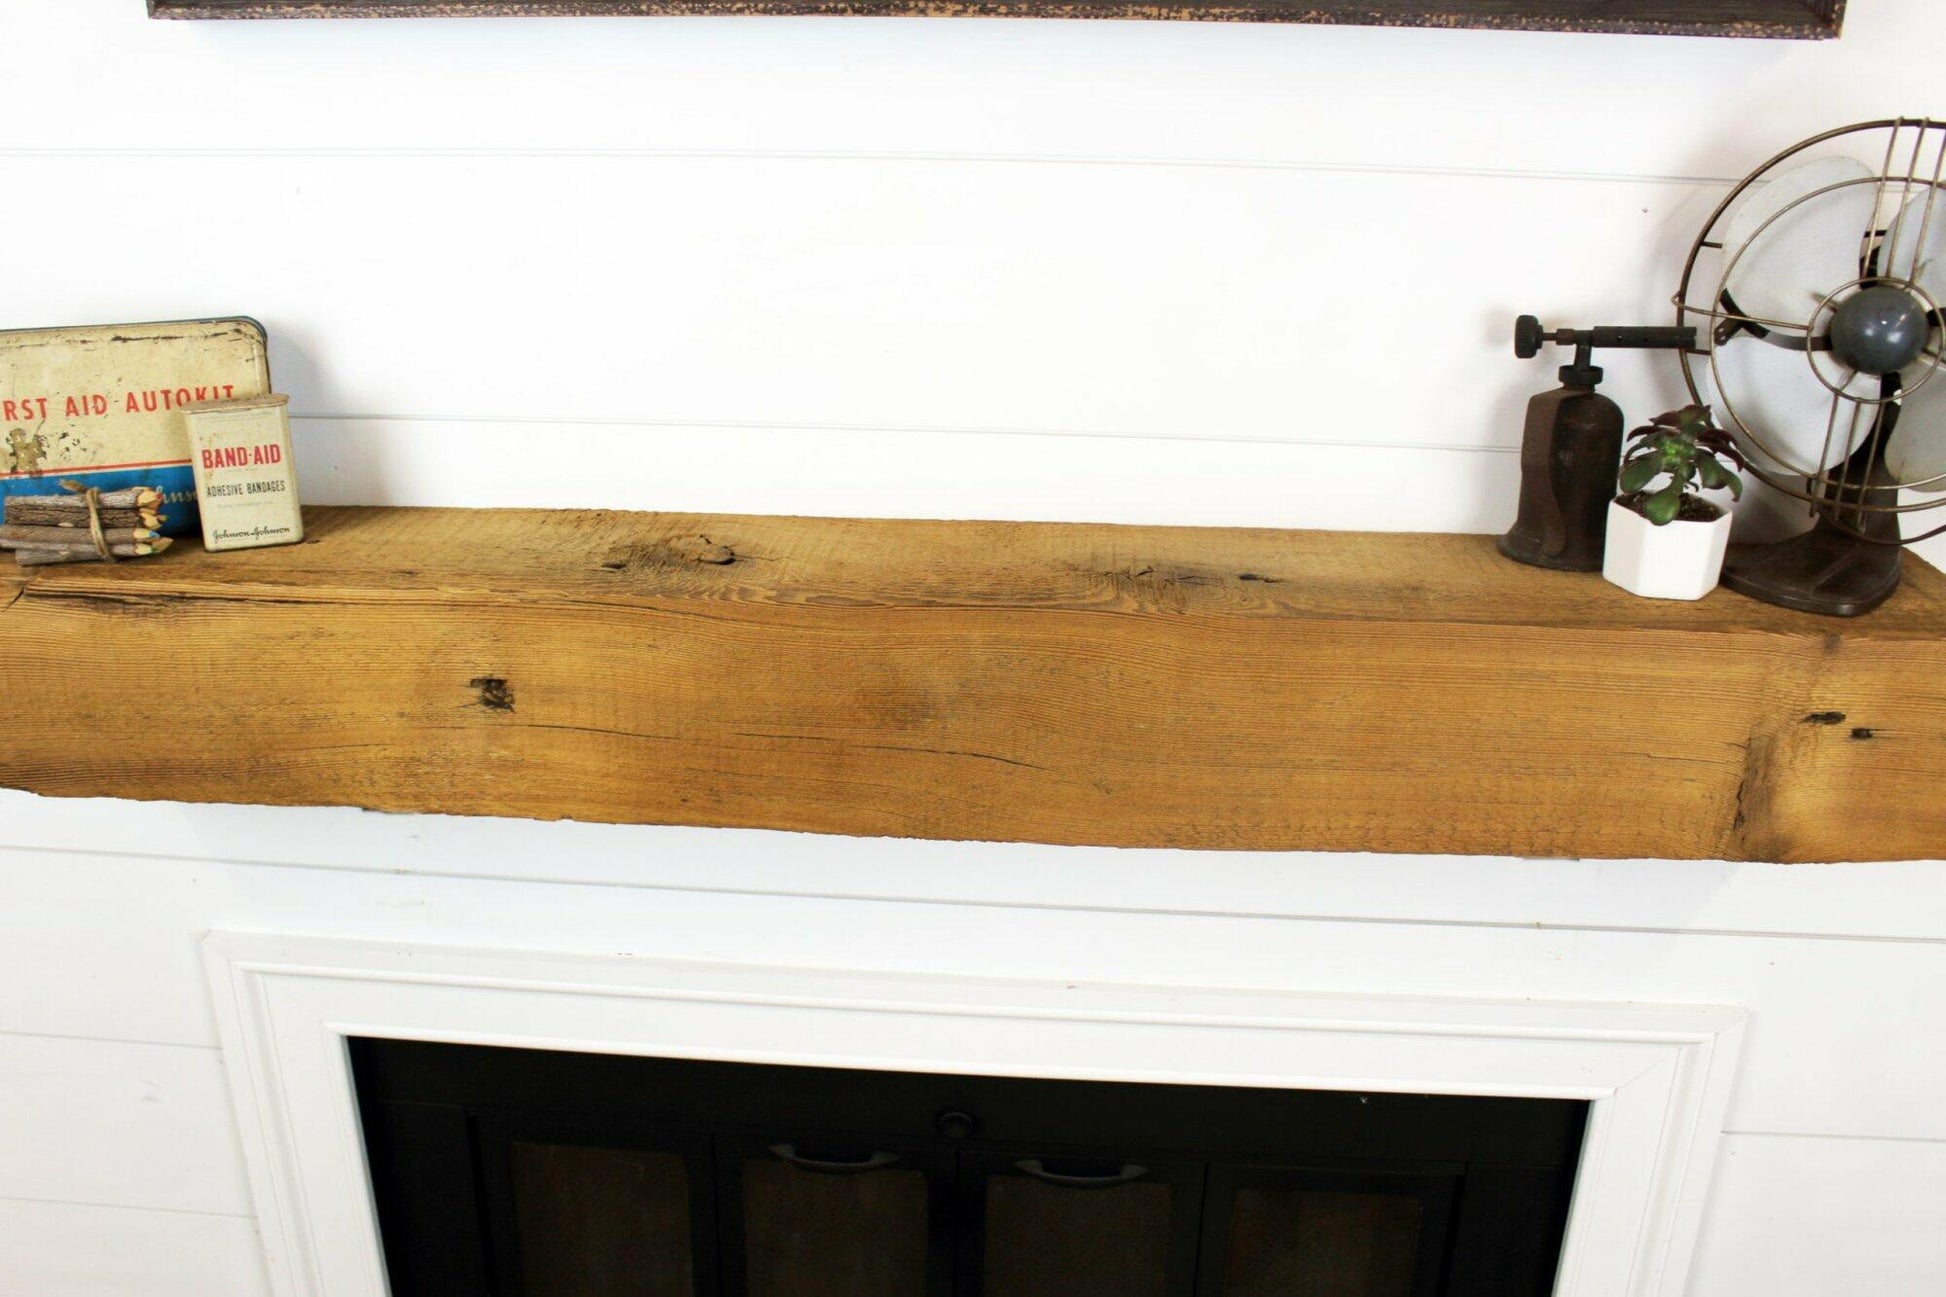 a close up of a reclaimed wood fireplace mantel in its natural color. The woods grain pattern, texture, knots, and nail holes are displayed.